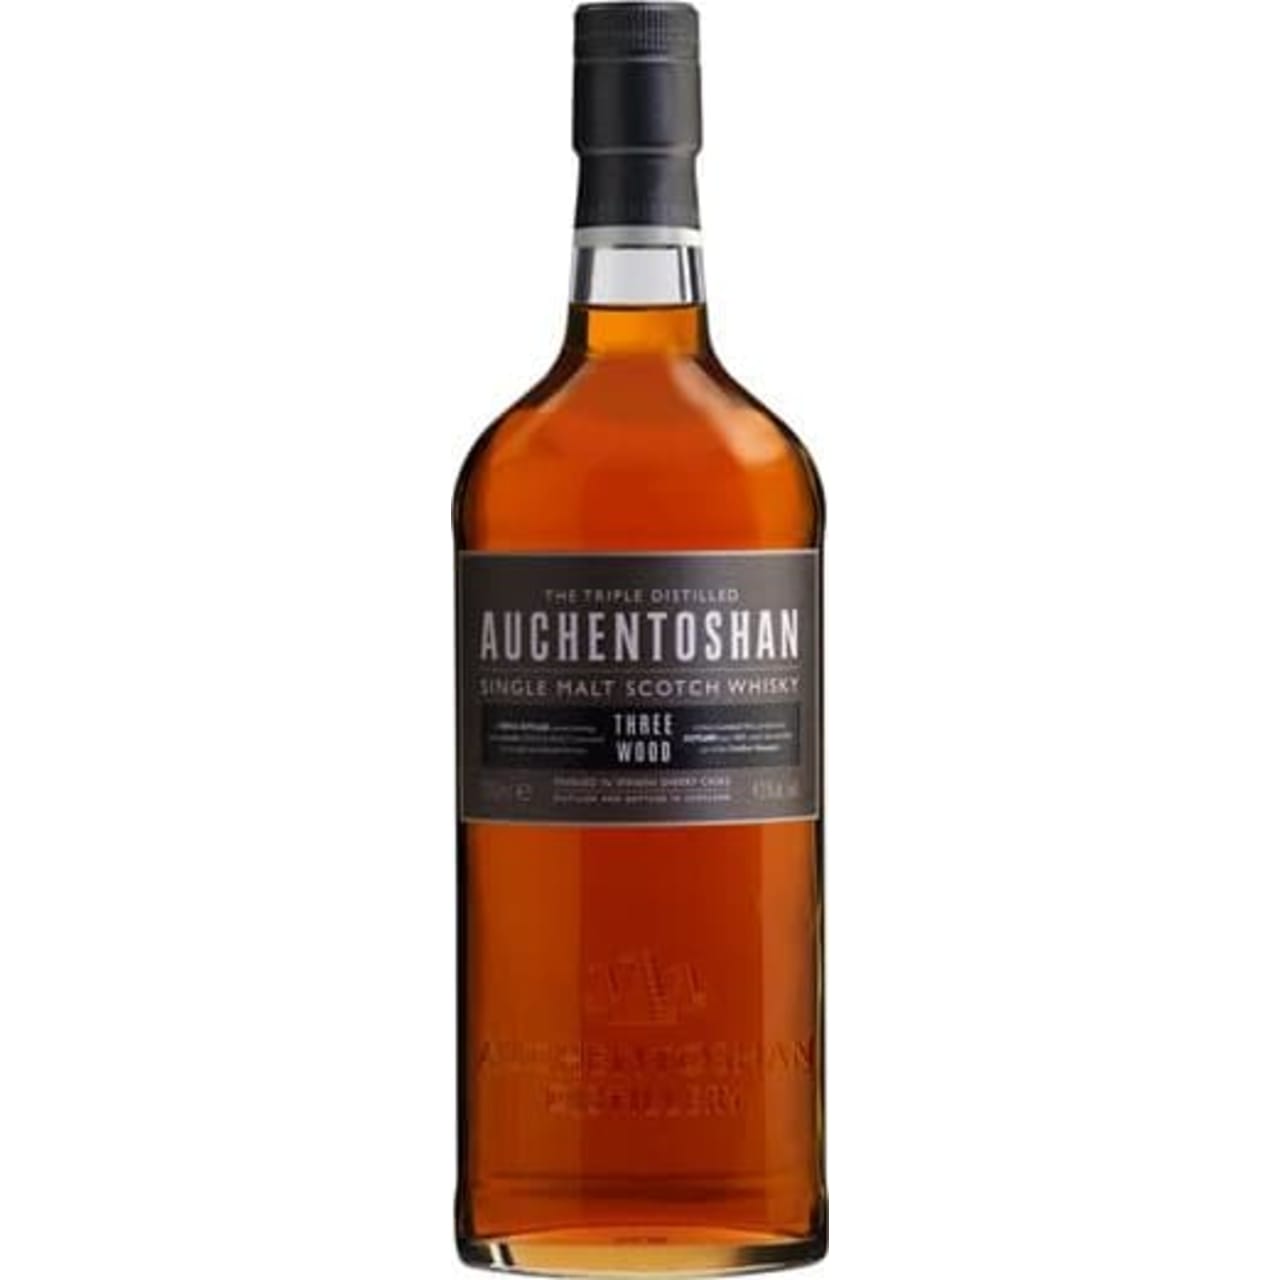 This is a rich, complex whisky with toffee and sherry flavours.